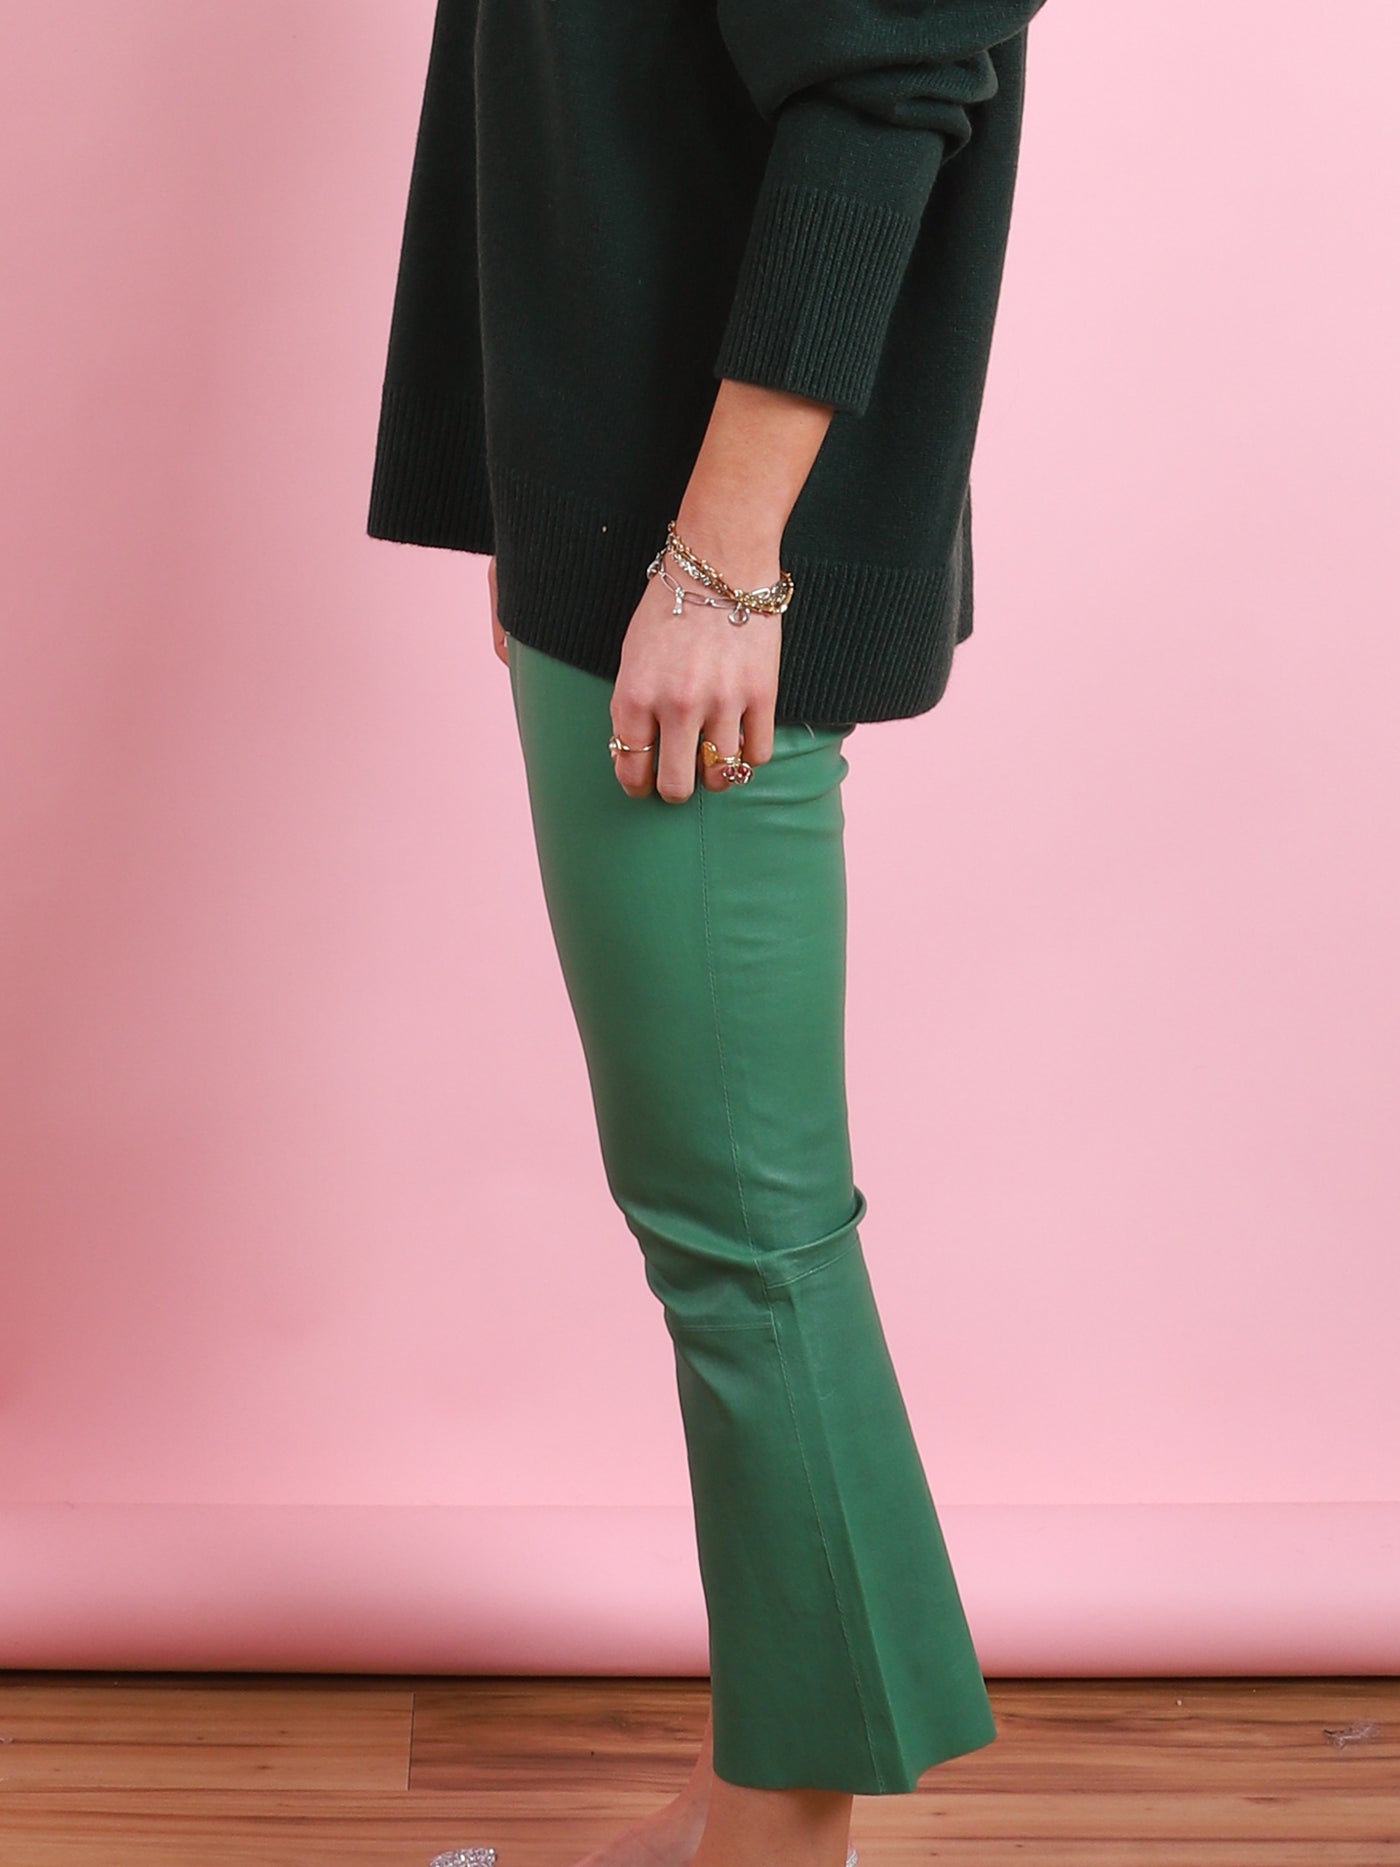 Crop Flare Leather Legging in Evergreen